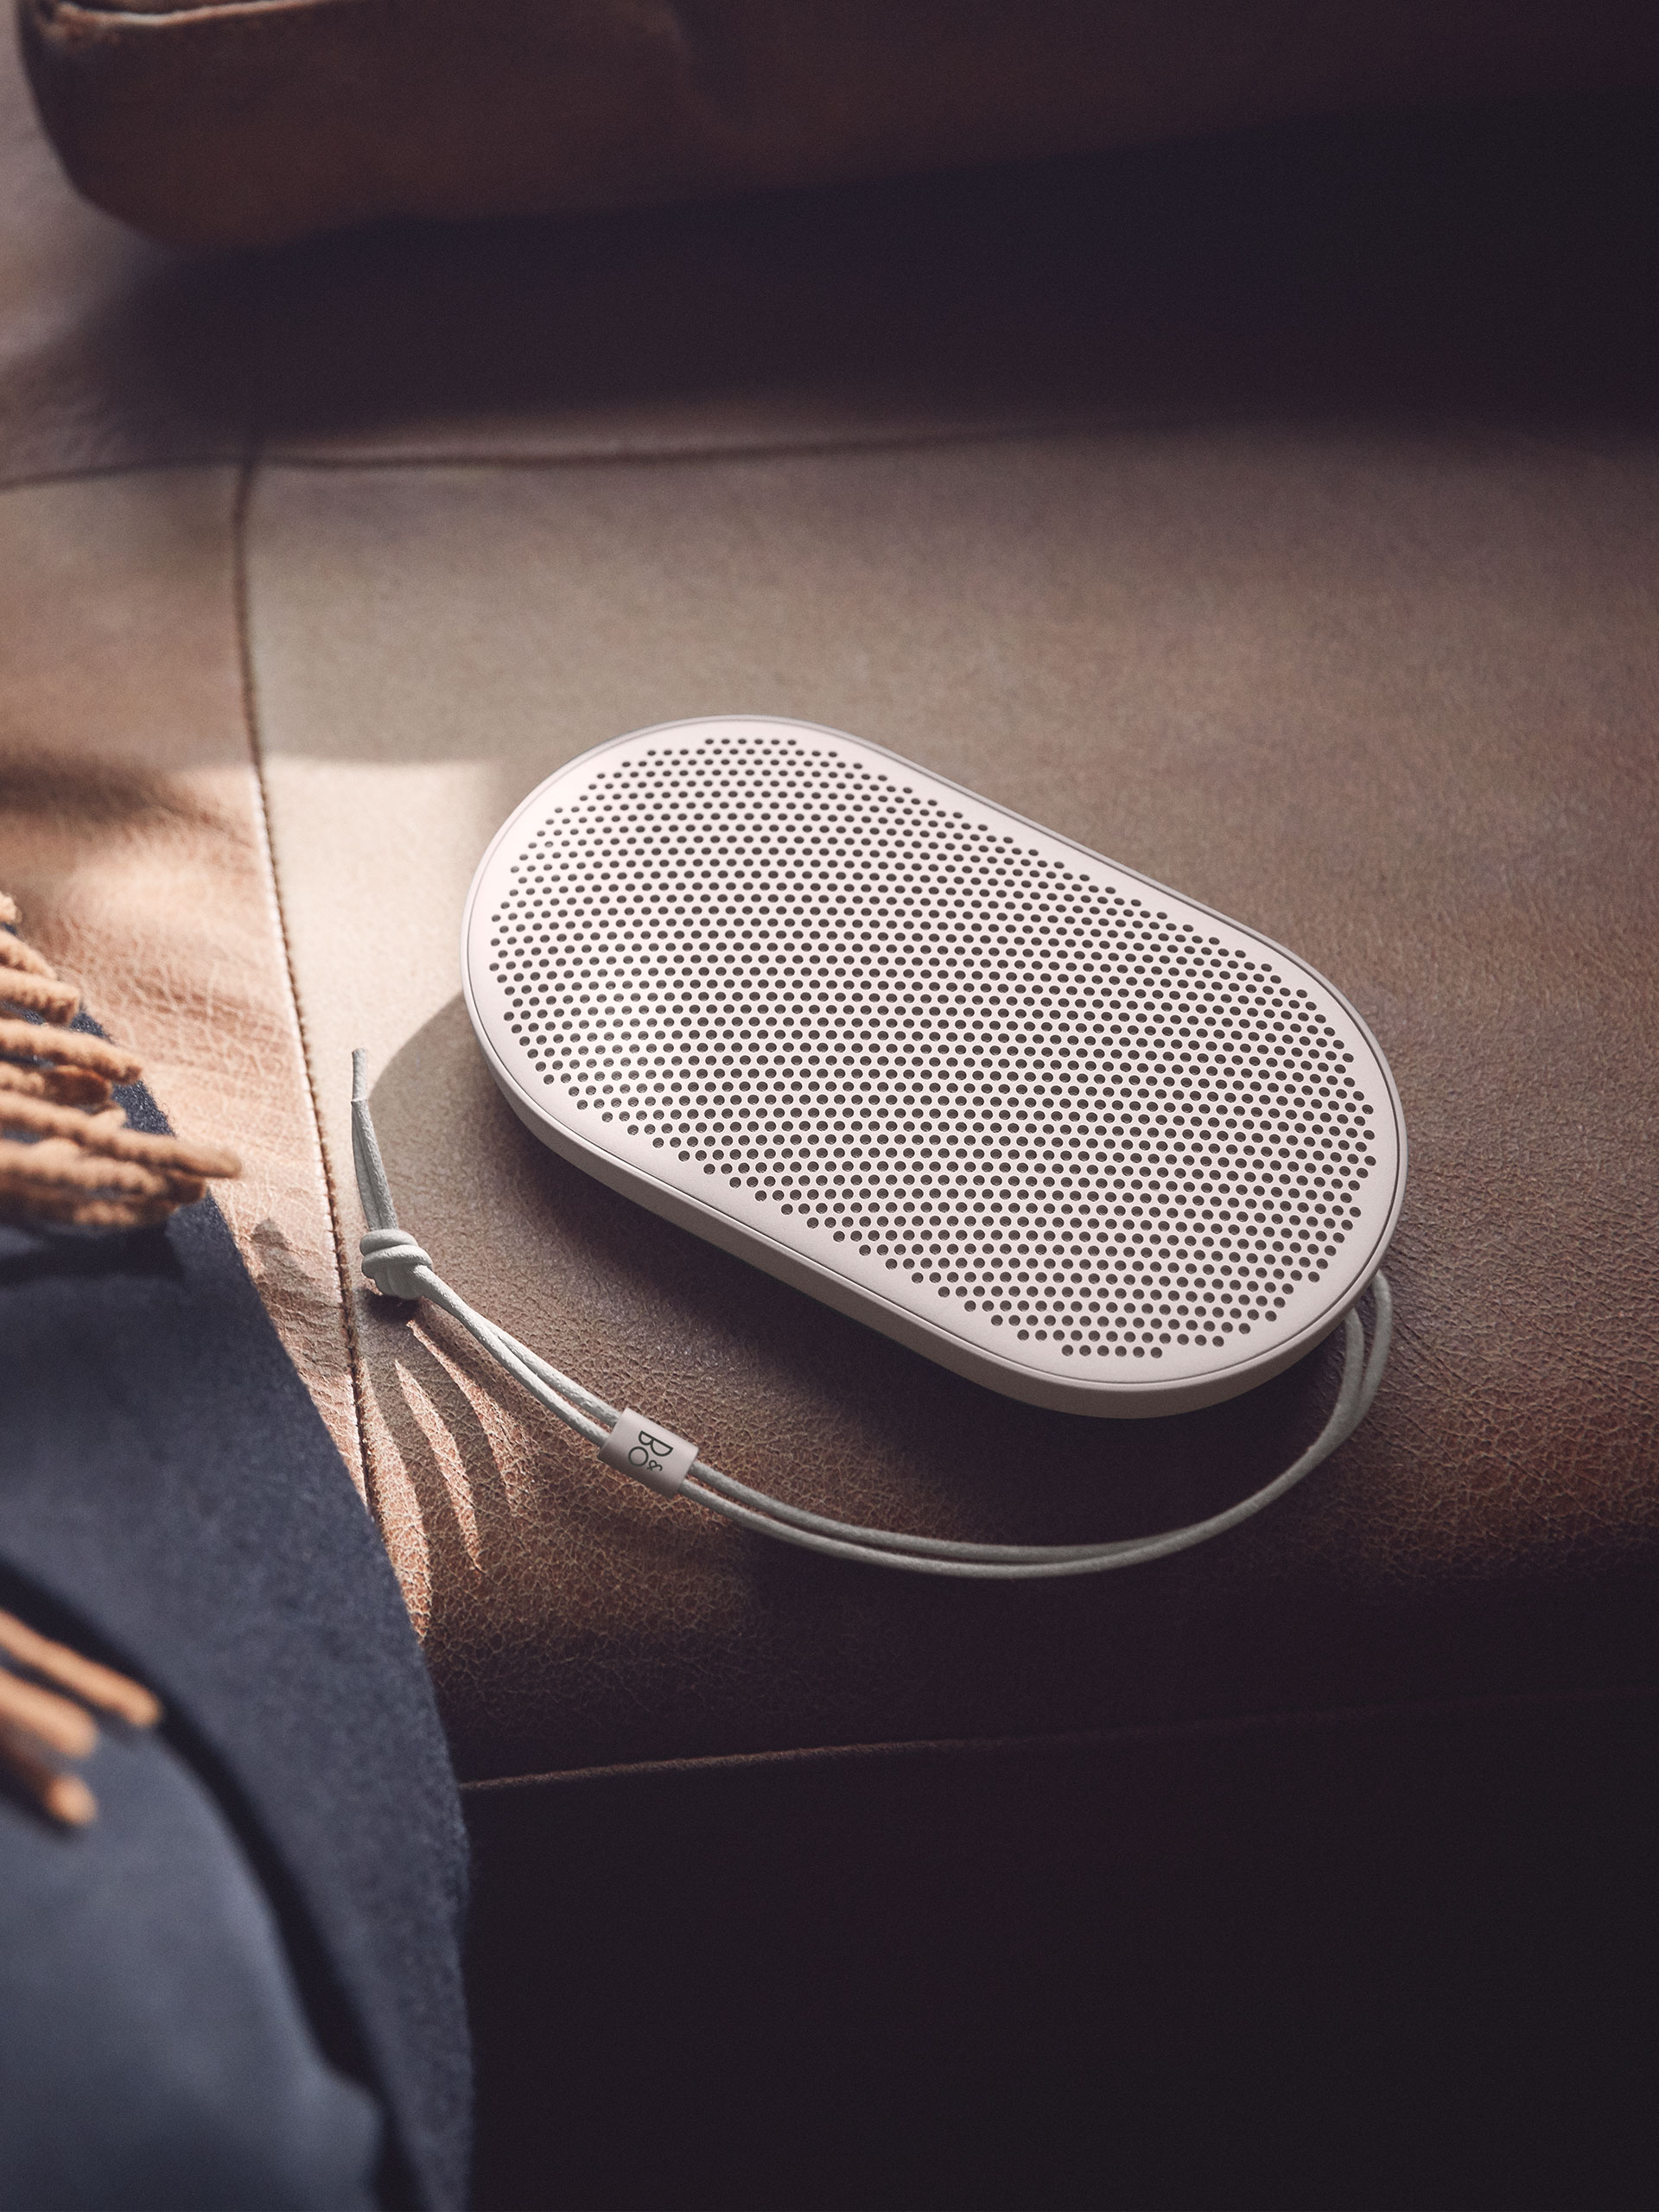 Beoplay P2   Personal, Portable Bluetooth Speaker   B&O